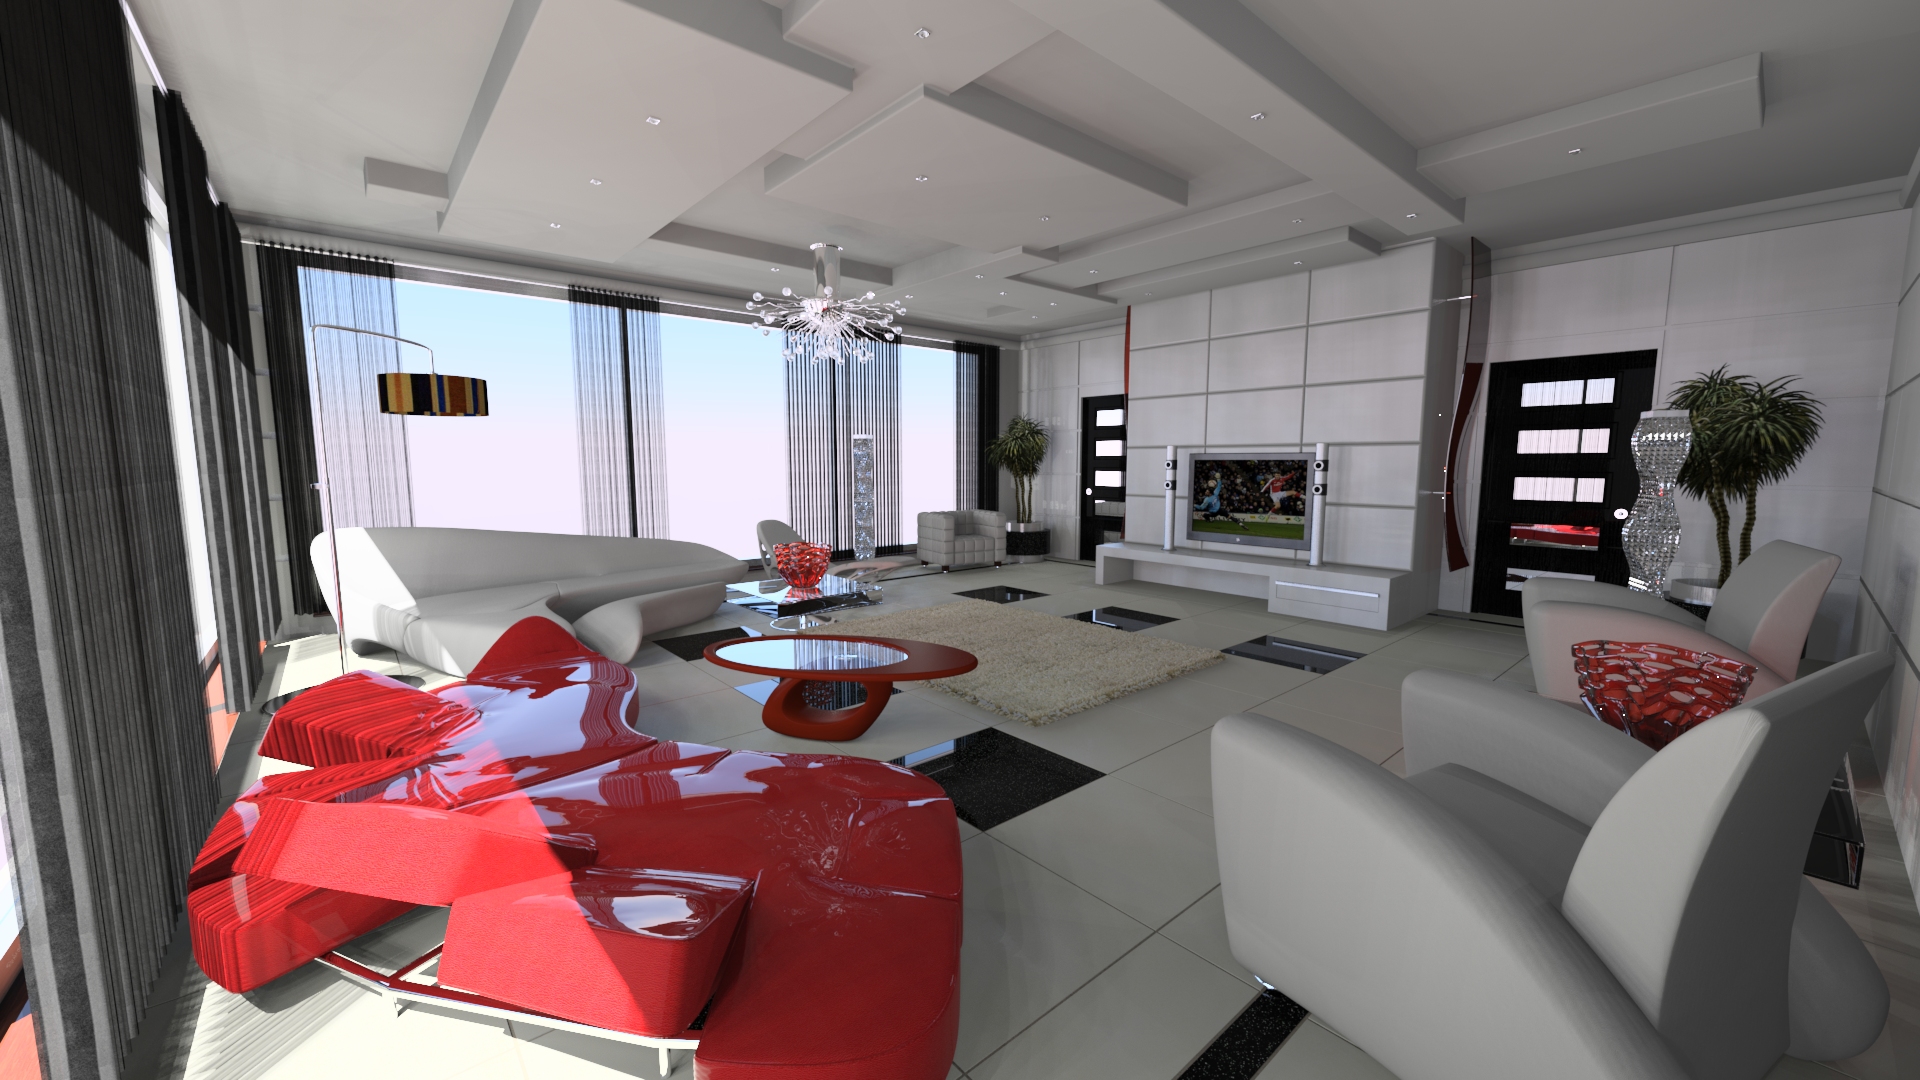 Lounge designed by Mike Makki nXtRender for AutoCAD